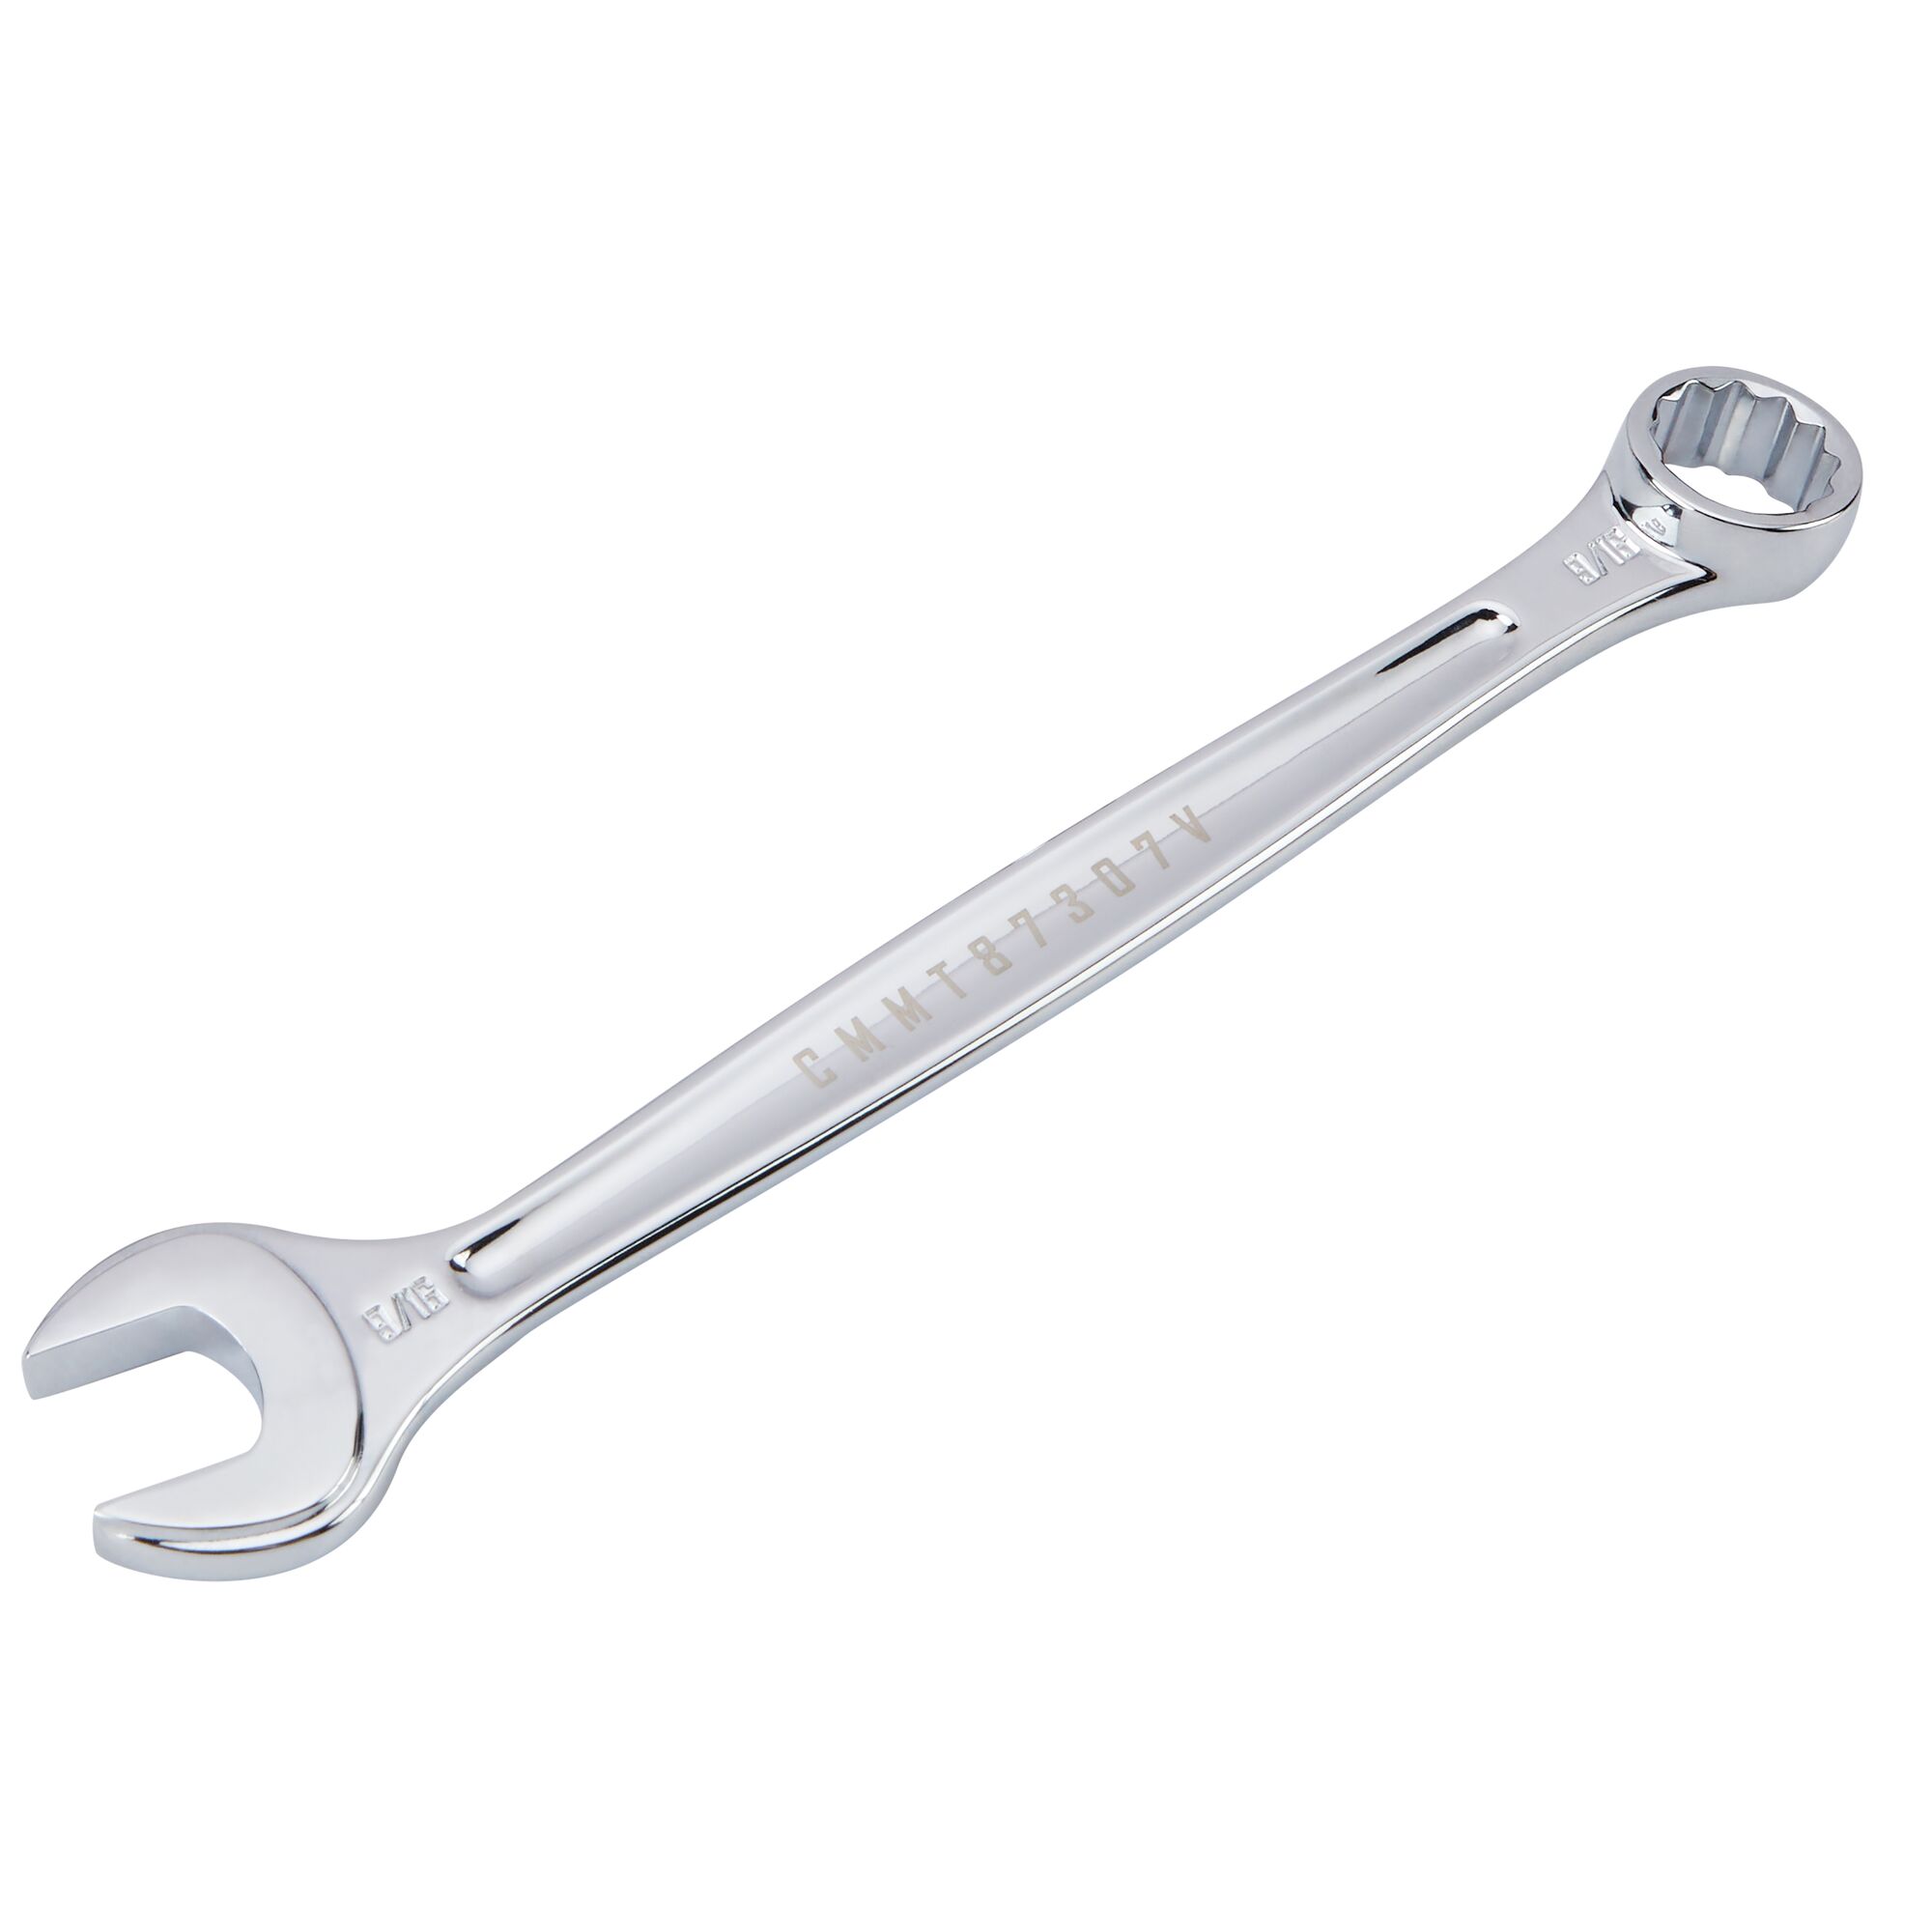 CRAFTSMAN V-SERIES Combo Wrench 9/16 